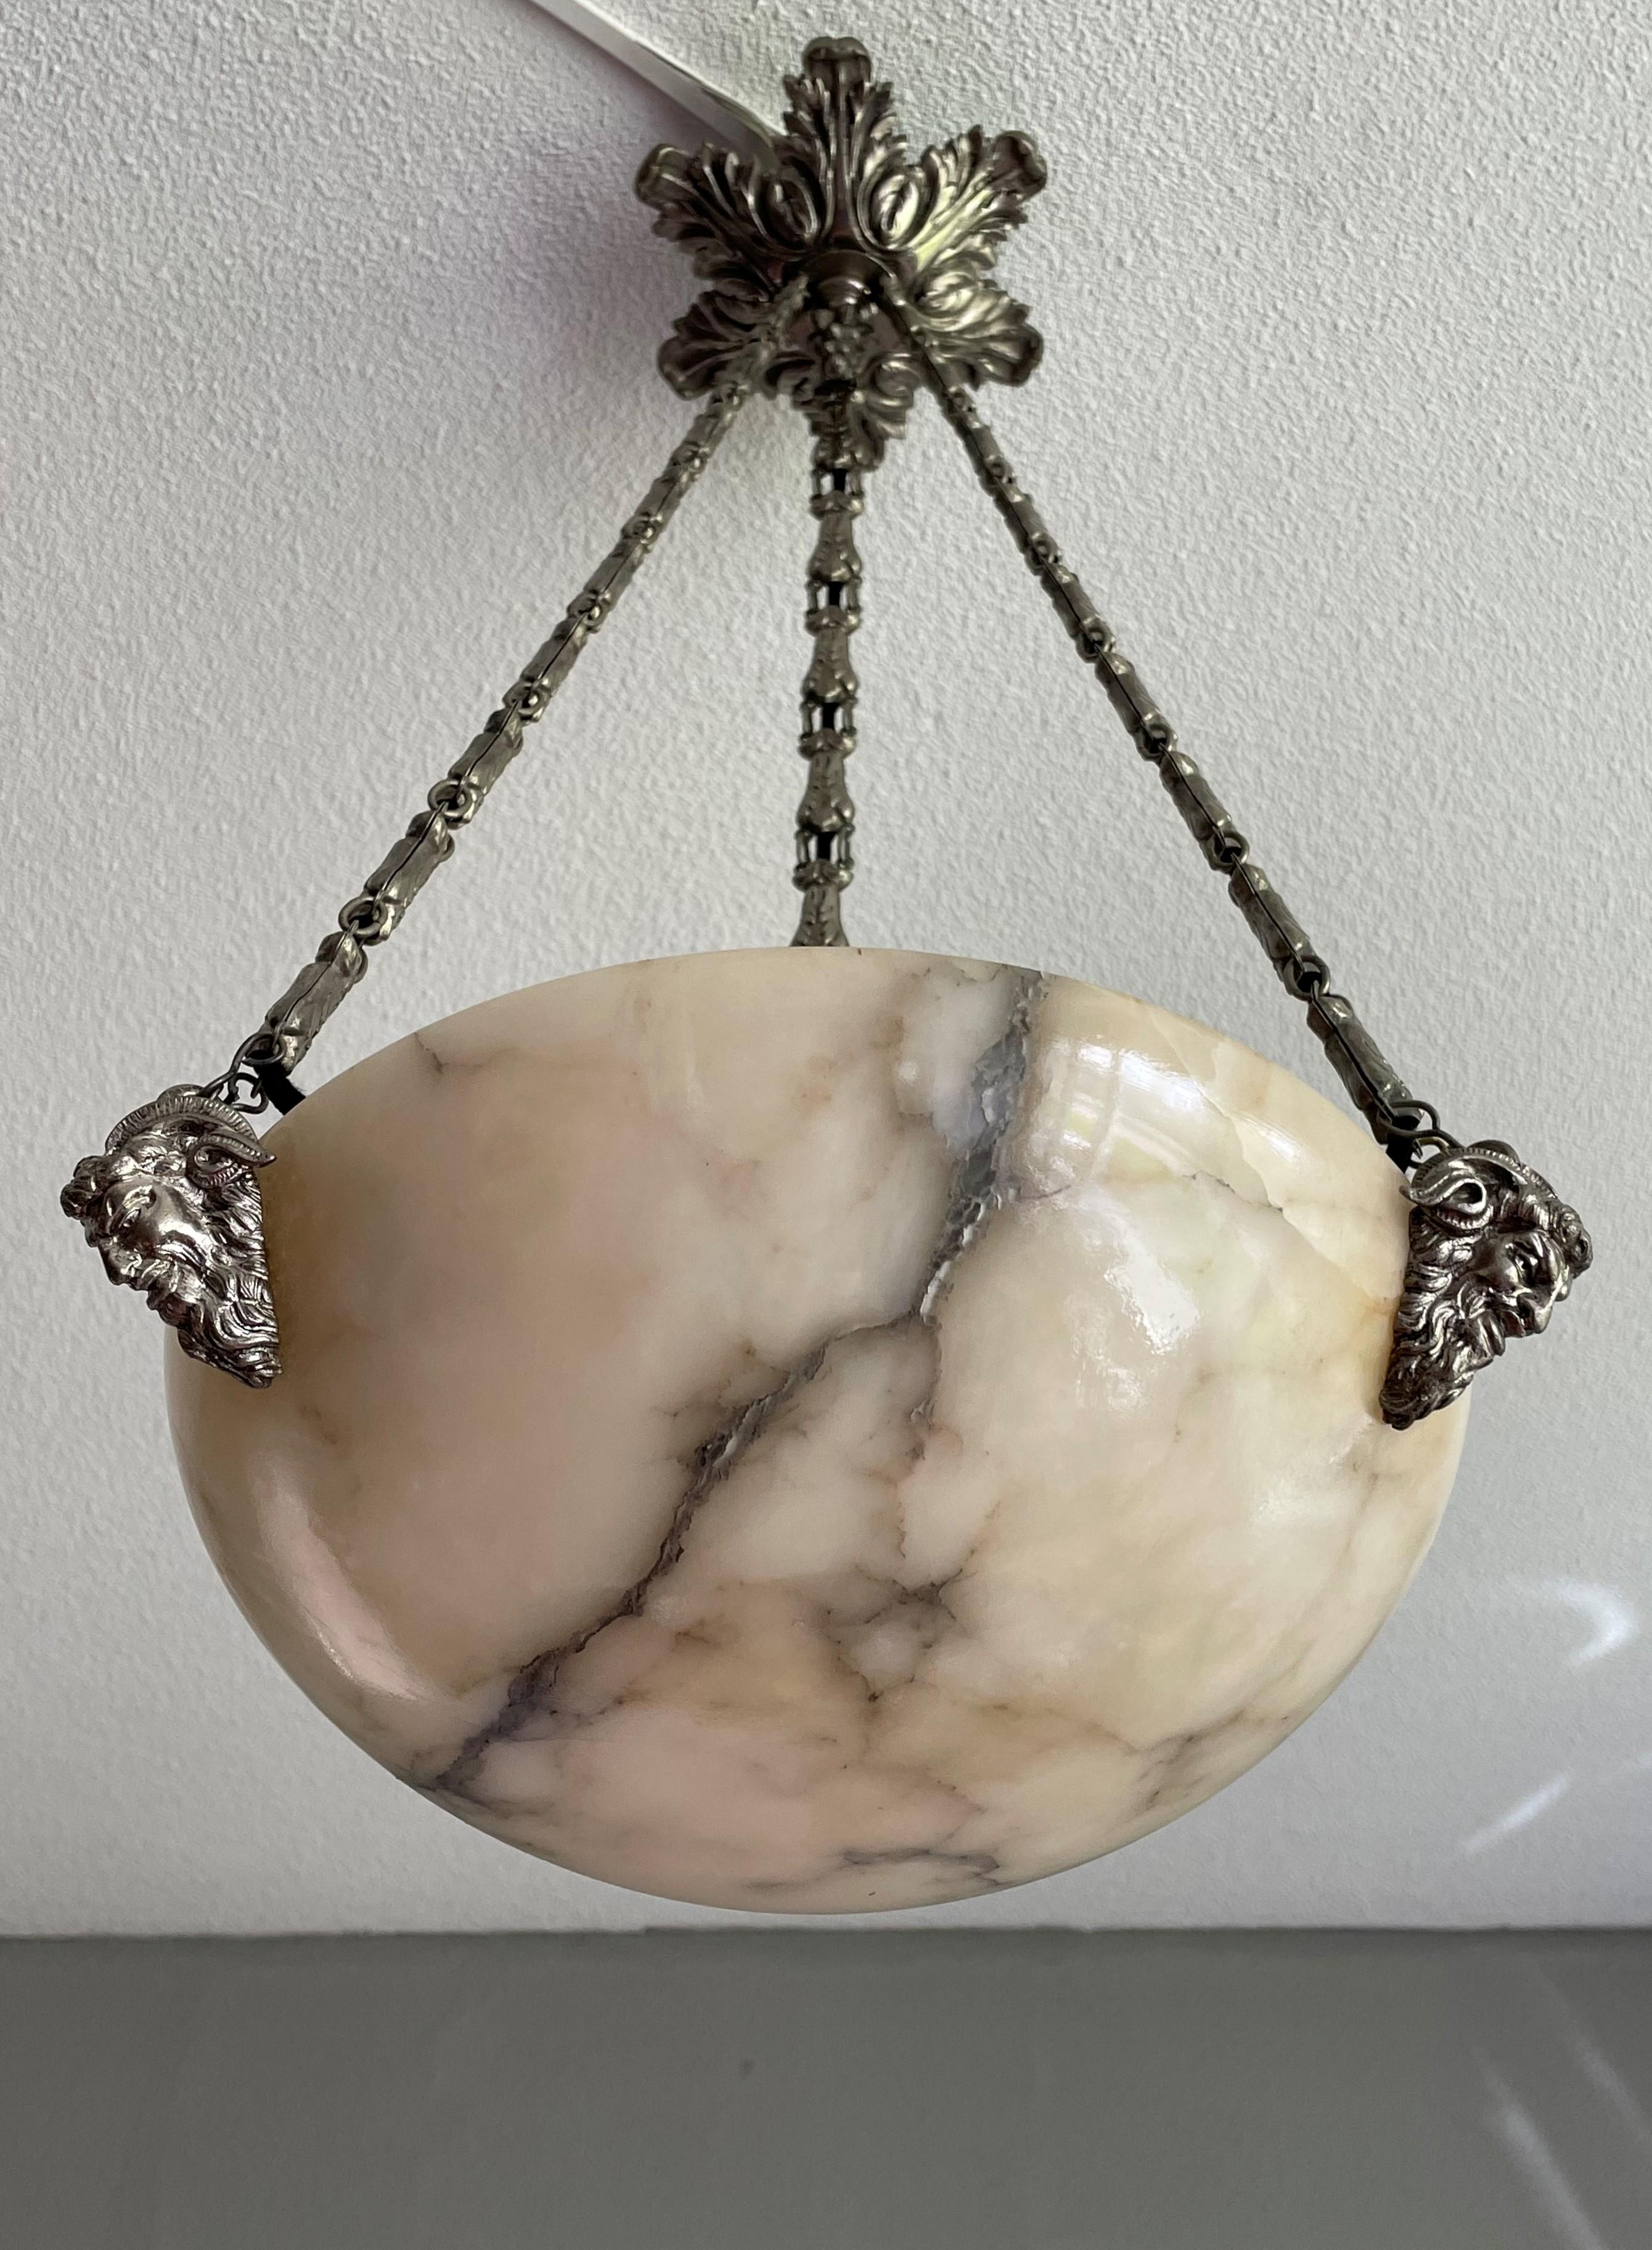 Rococo Revival Small & Coolest Ever Antique White & Black Alabaster Pendant w. Satyr Sculptures